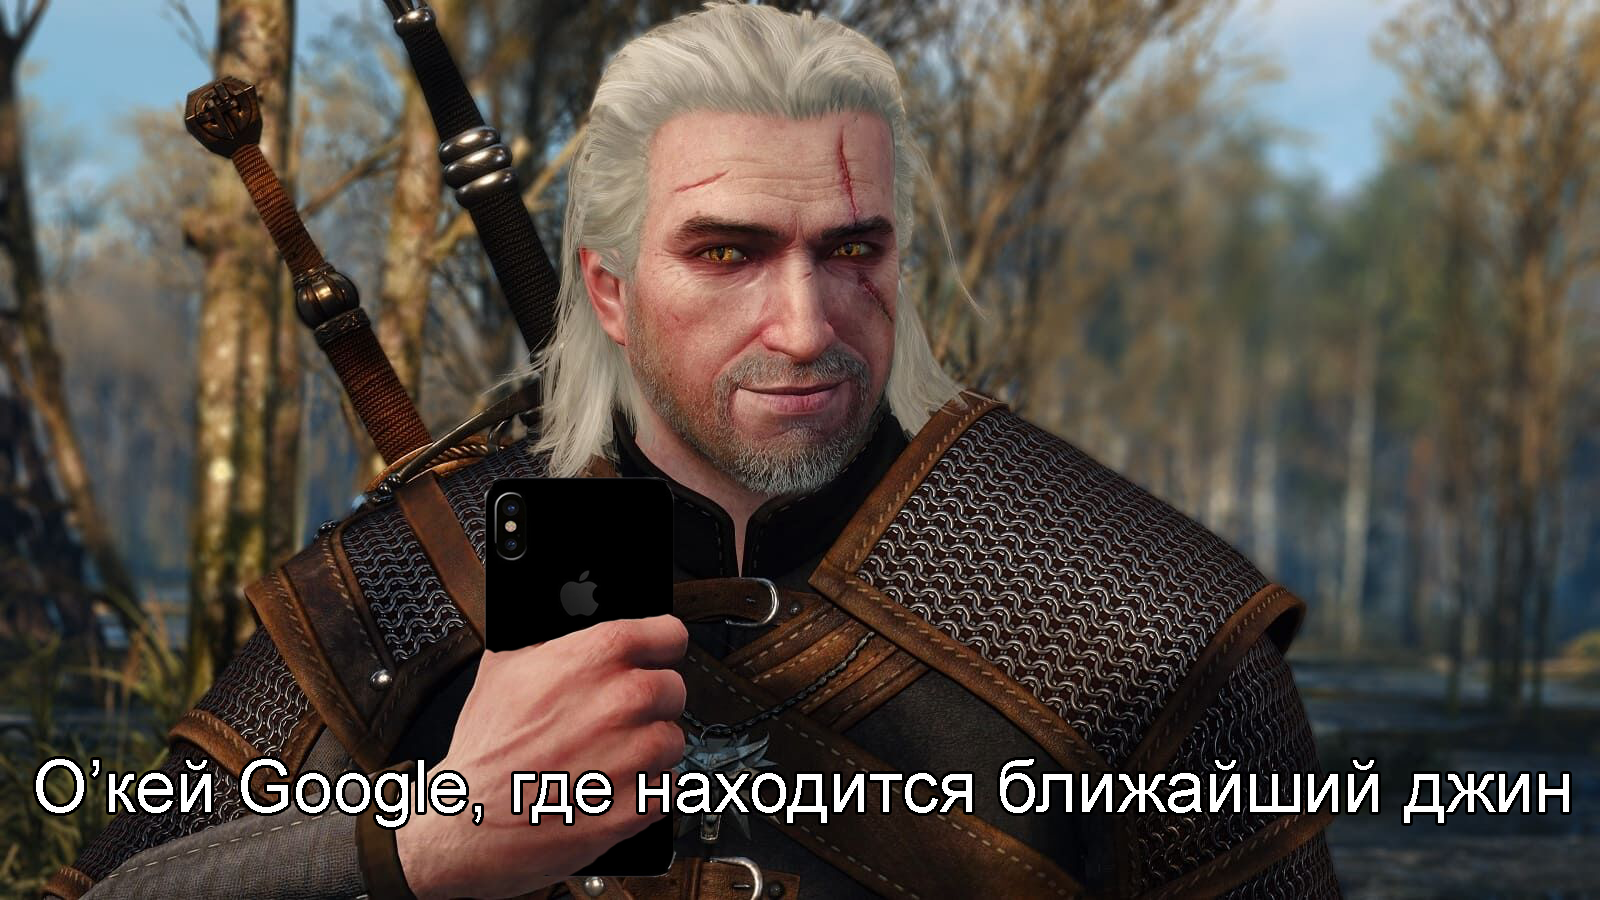 The witcher series, the reasons why they do not like him - My, Witcher, Netflix, The Witcher series, Elves, Krasnolyudy, Geralt of Rivia, Memes, Longpost